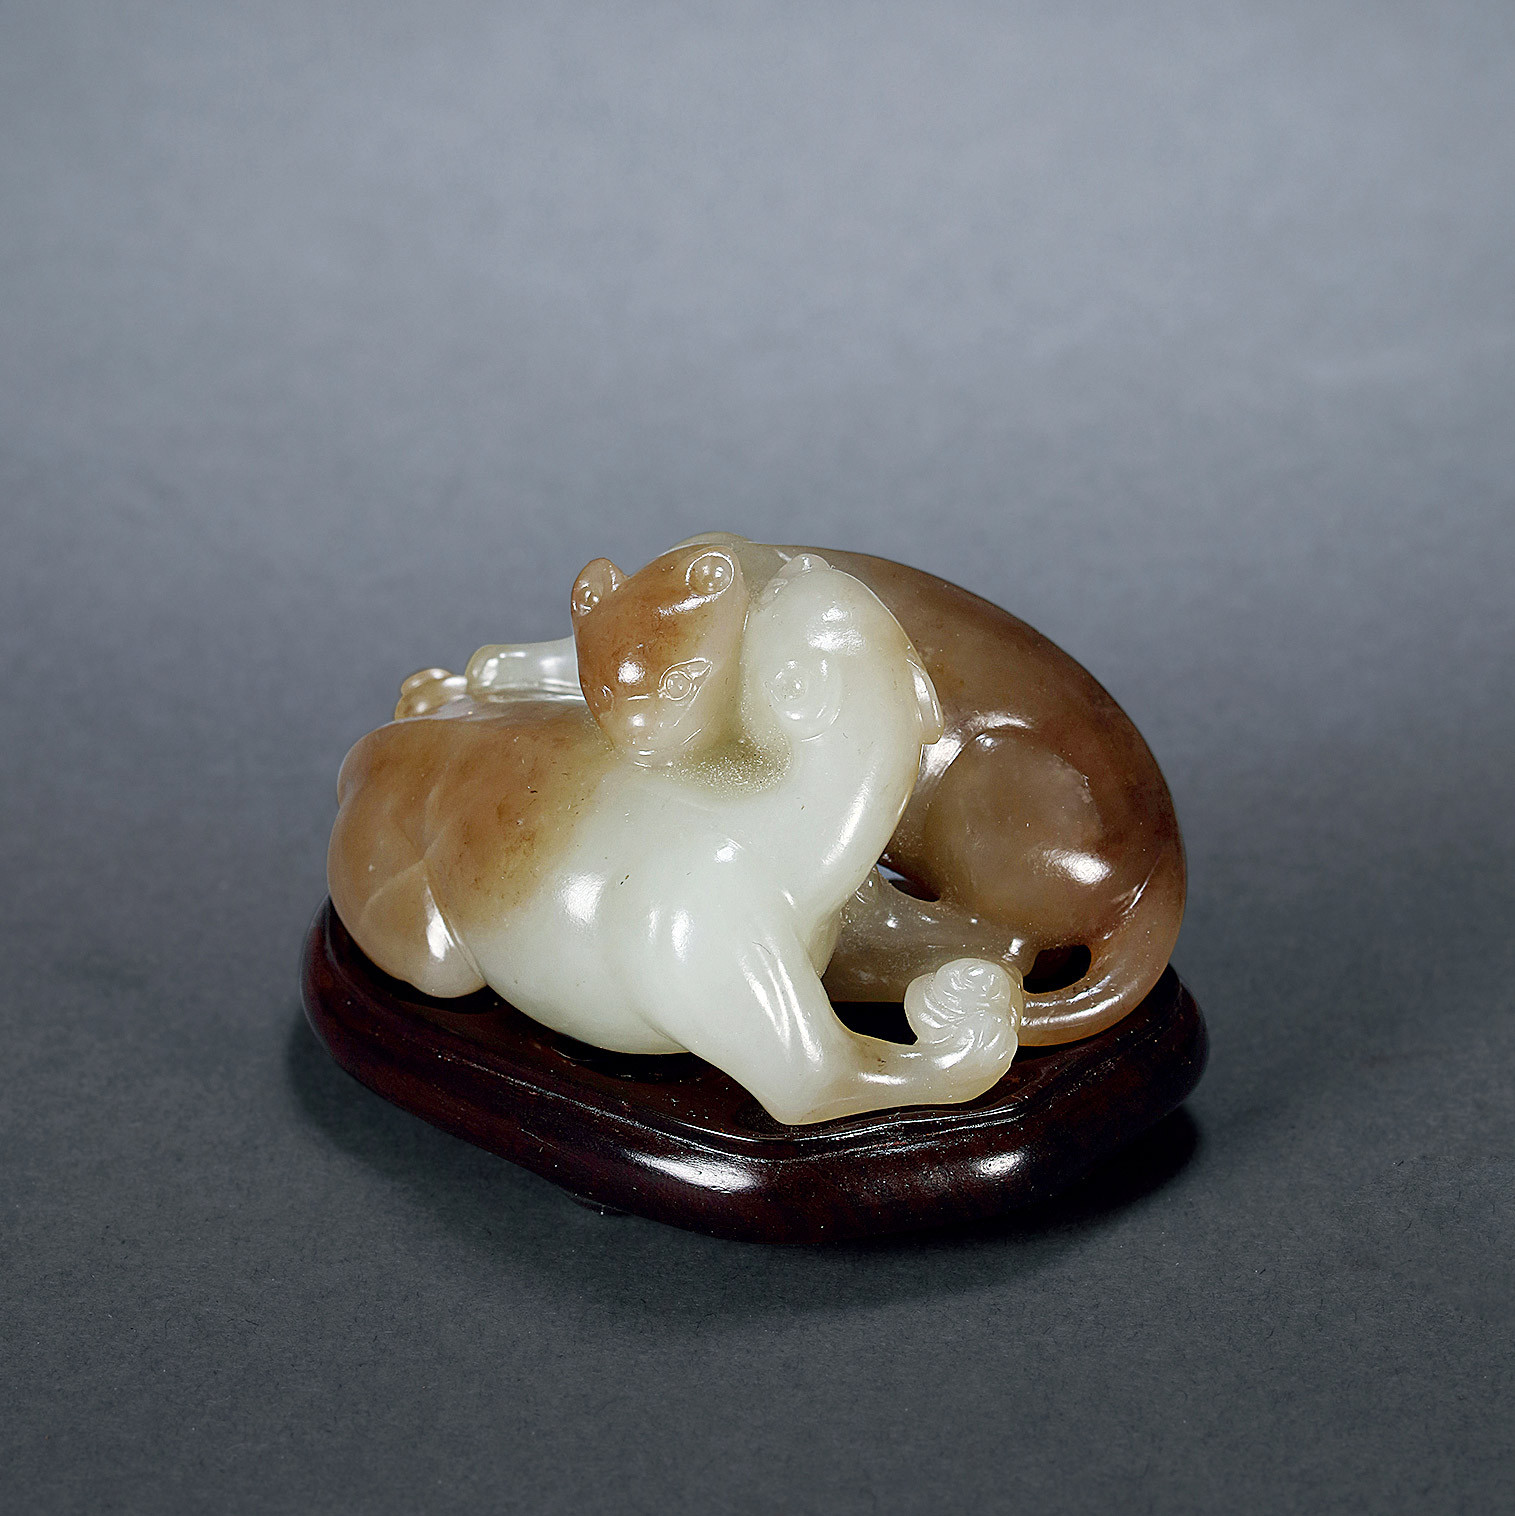 Light Greenish White Jade Carved Ornament with Design of Two badgers